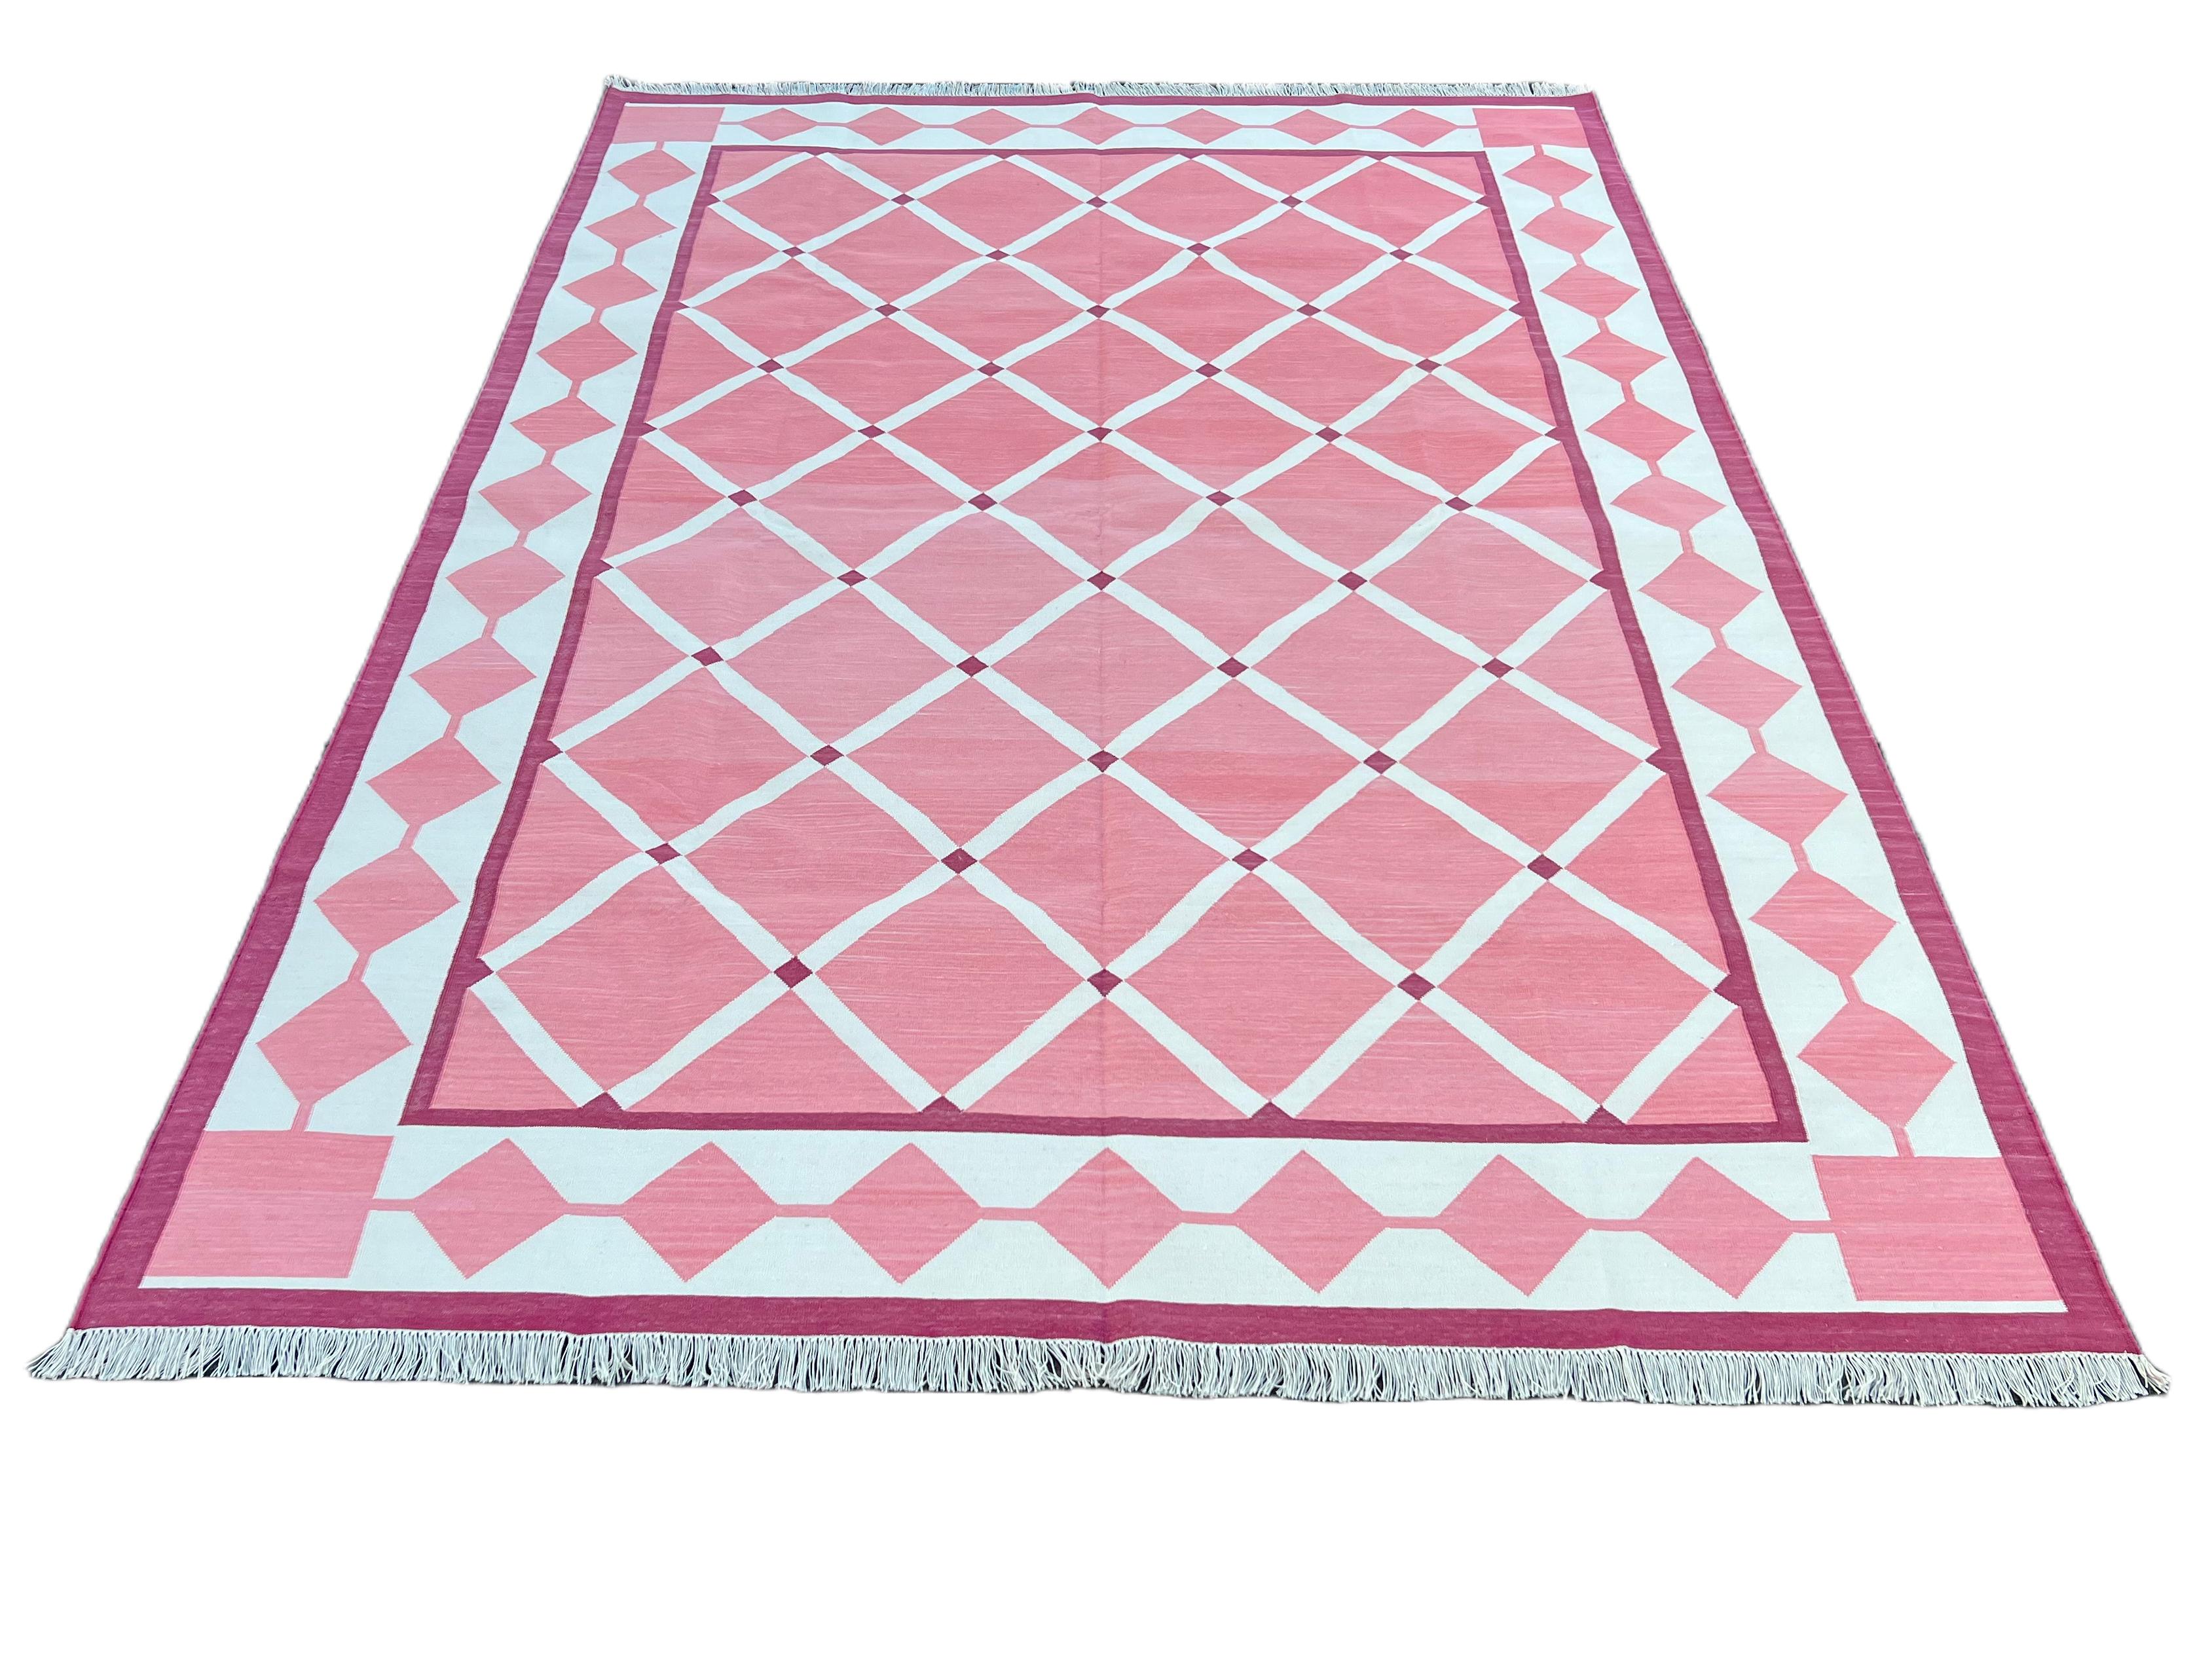 Contemporary Handmade Cotton Area Flat Weave Rug, 6x9 Pink And White Geometric Indian Dhurrie For Sale